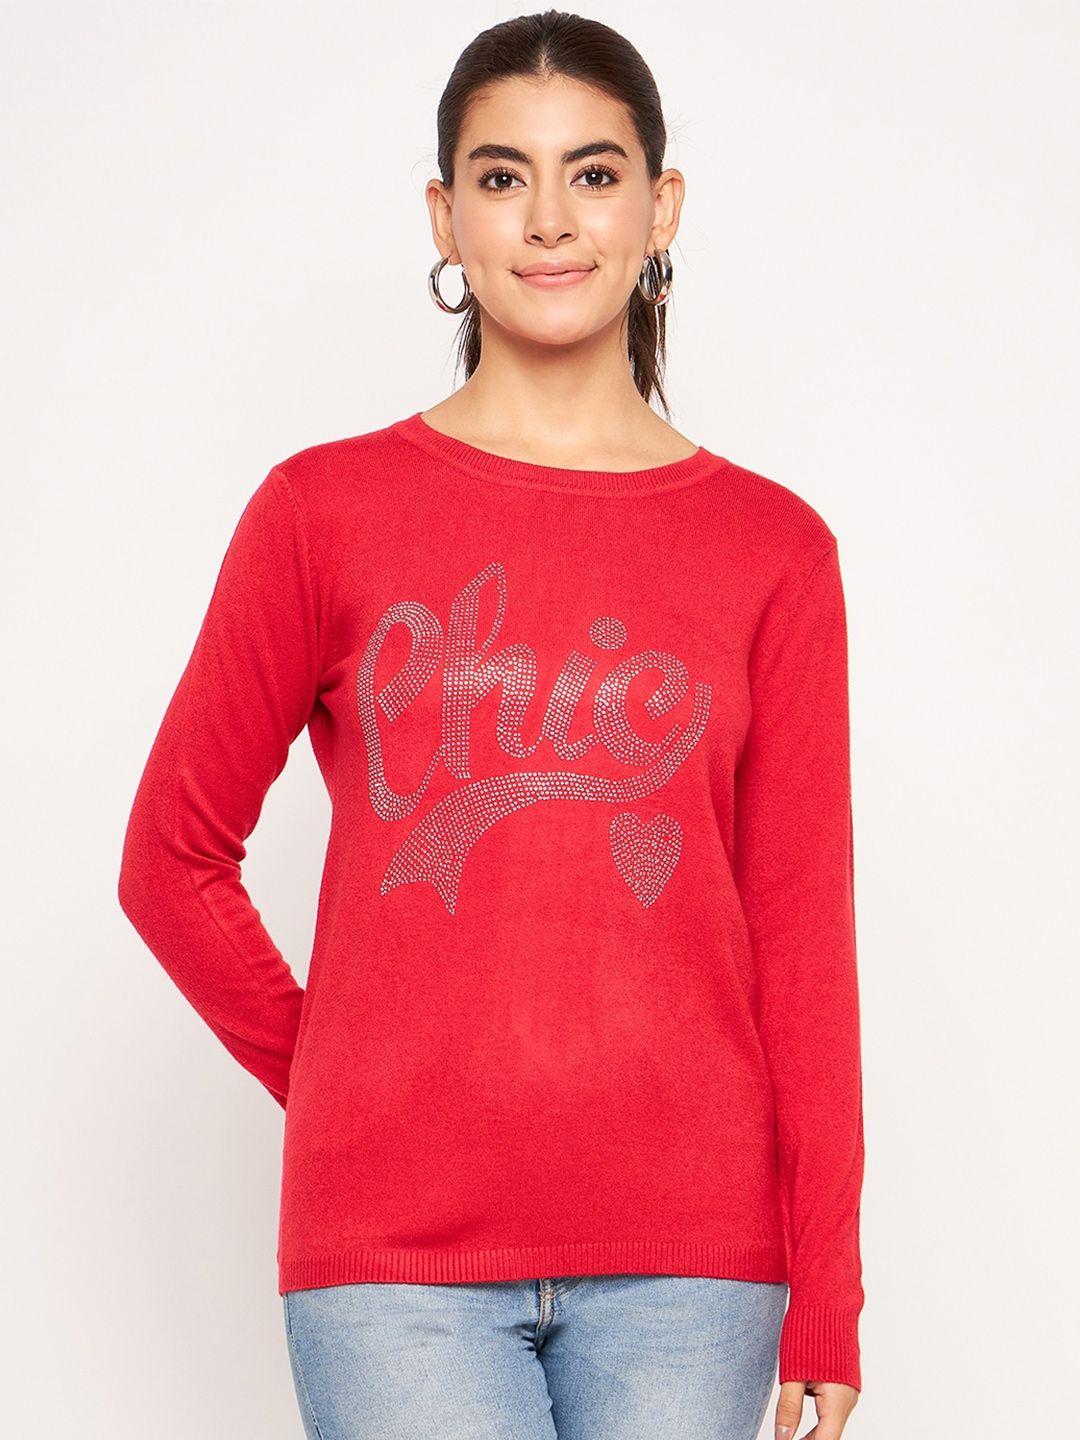 camey typography printed round neck long sleeves embellished wool pullover sweater